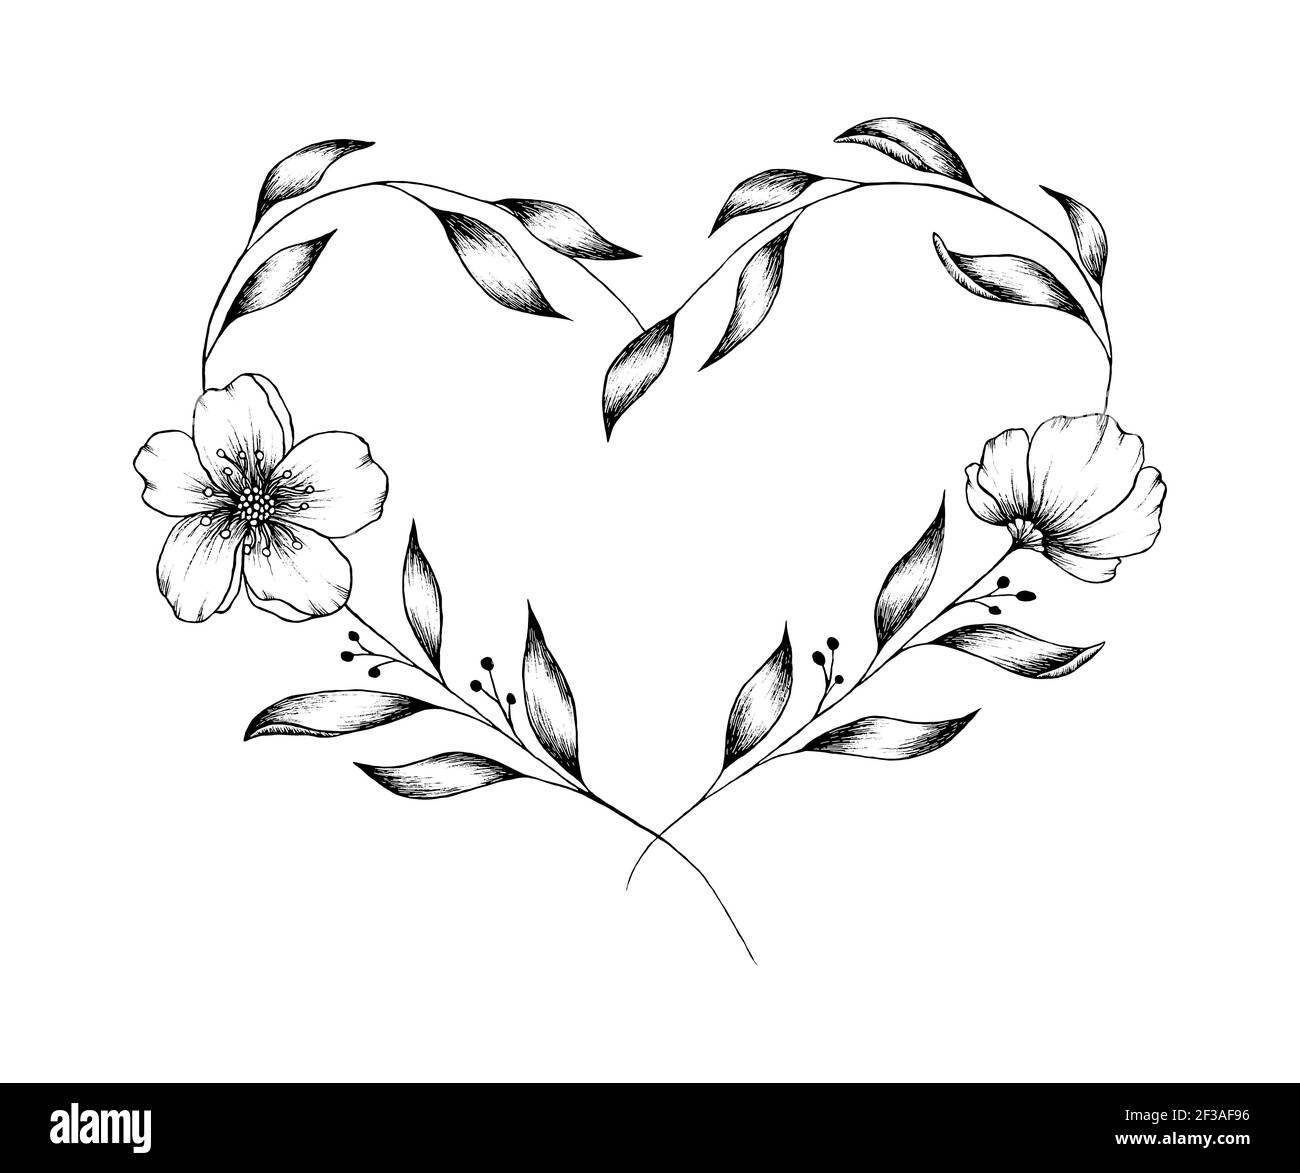 Line Art Floral Heart Design Isolated On White Ink Hand Drawn Heart With Flowers And Leaves Love Concept For Valentine S Day Mother S Day Stock Photo Alamy